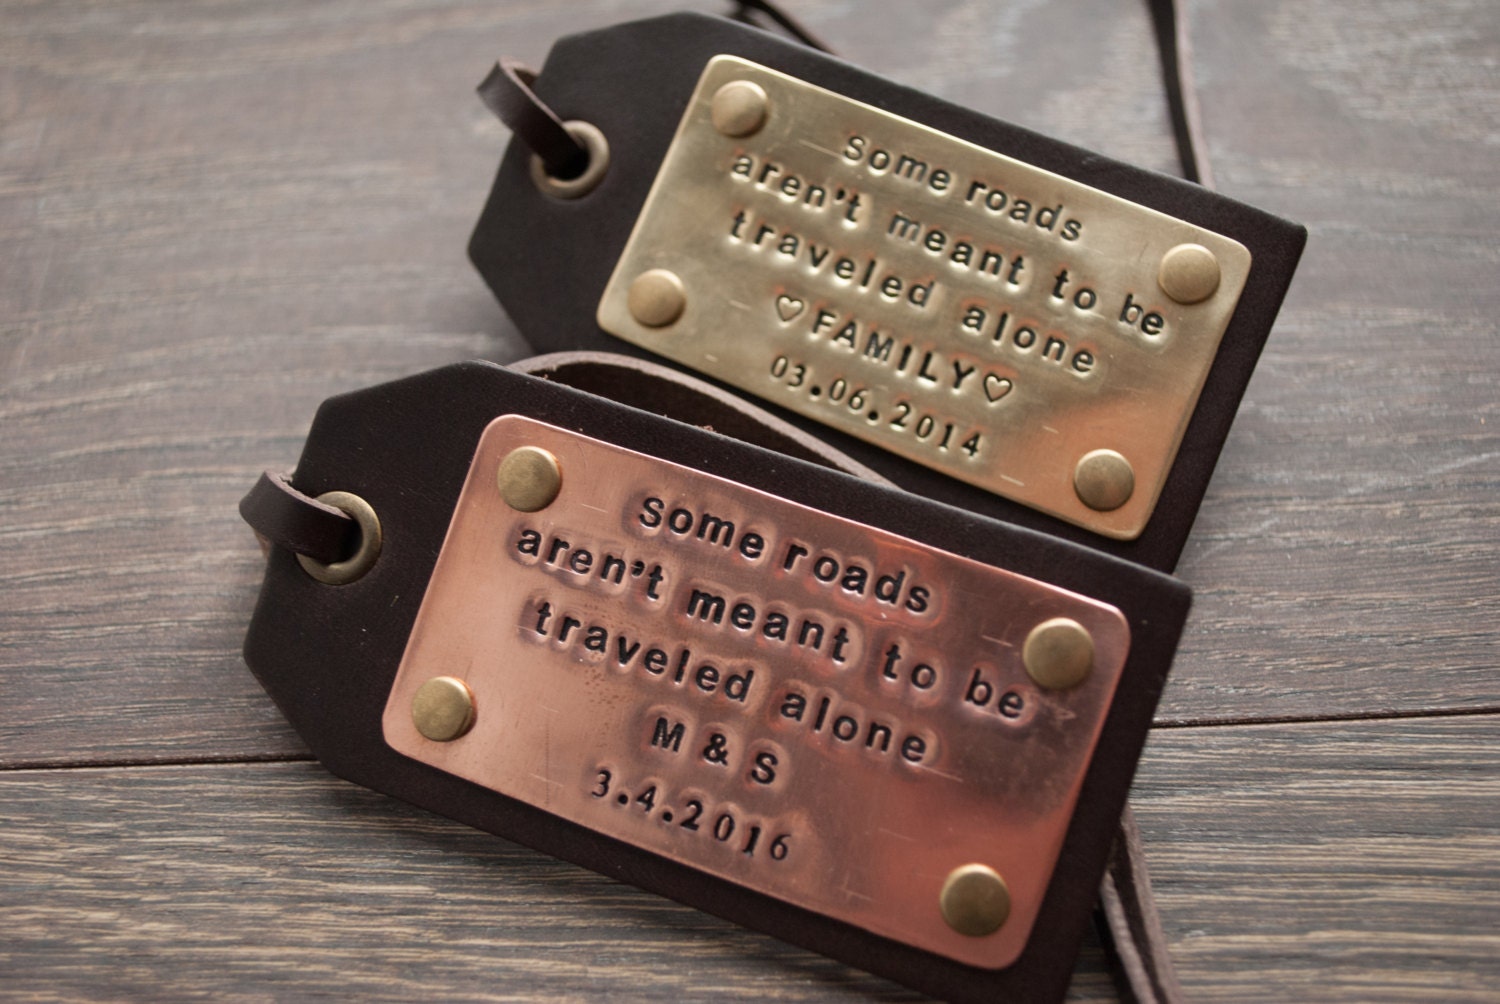 Leather luggage tag Personalized Wedding Gift Custom Wedding Gift Personalized Luggage Tag Anniversary gift Gift for Bride Travel tag